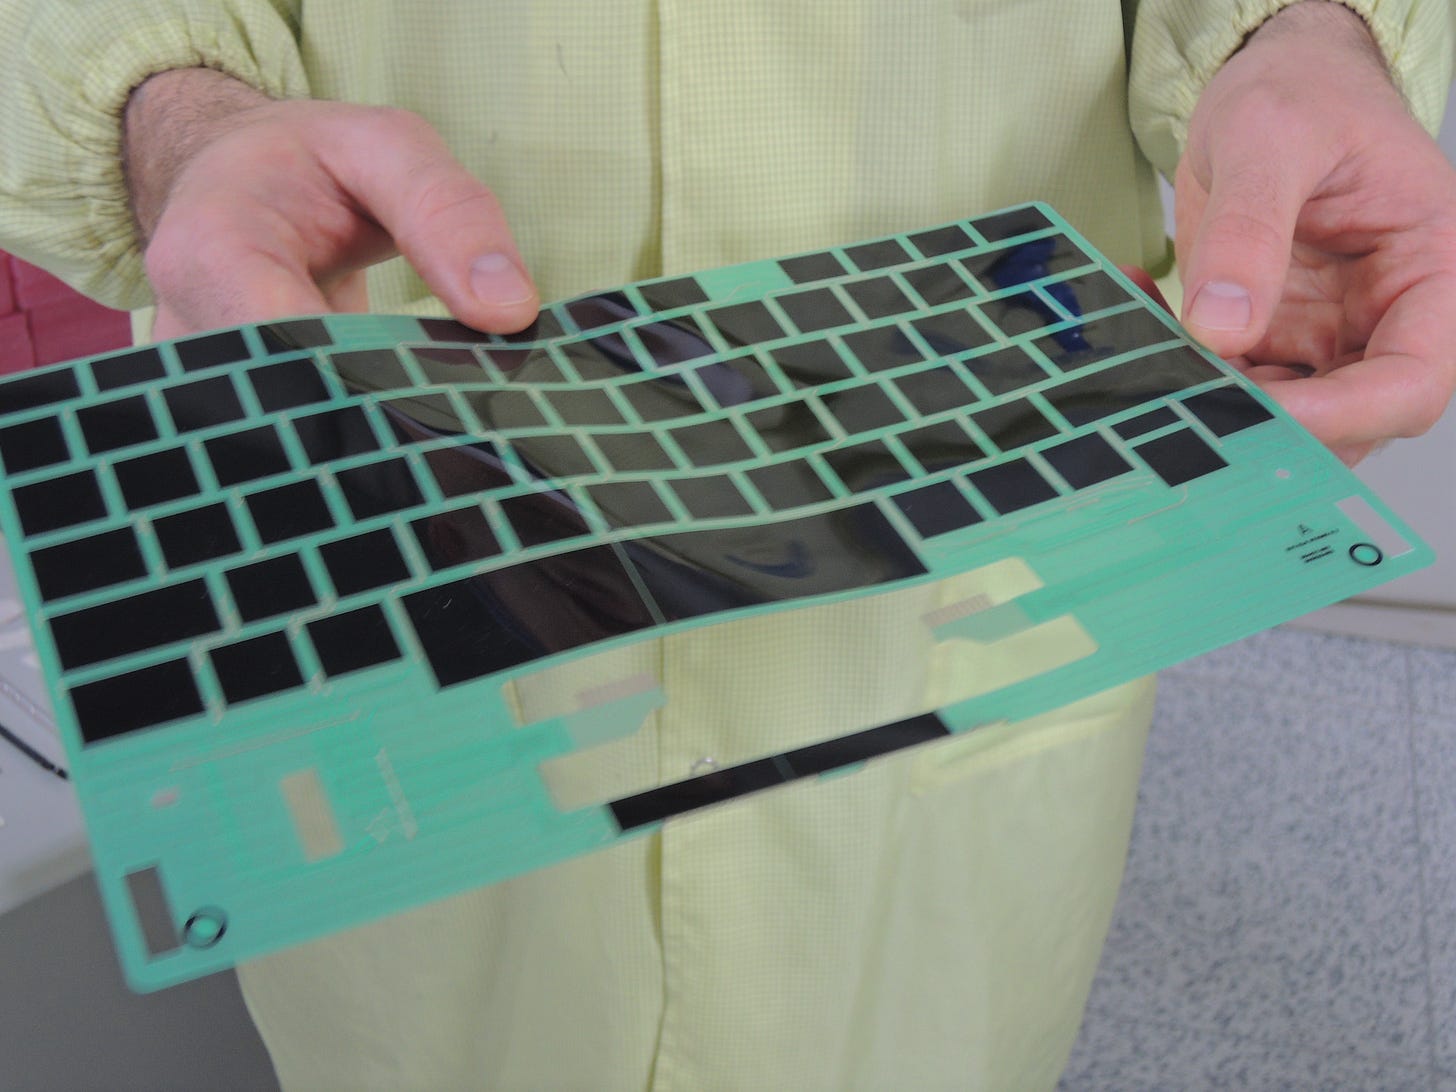 A person holding the touch layer of the Touch Cover. It is a very very thin and flexible piece of plastic with outlines for the keys.